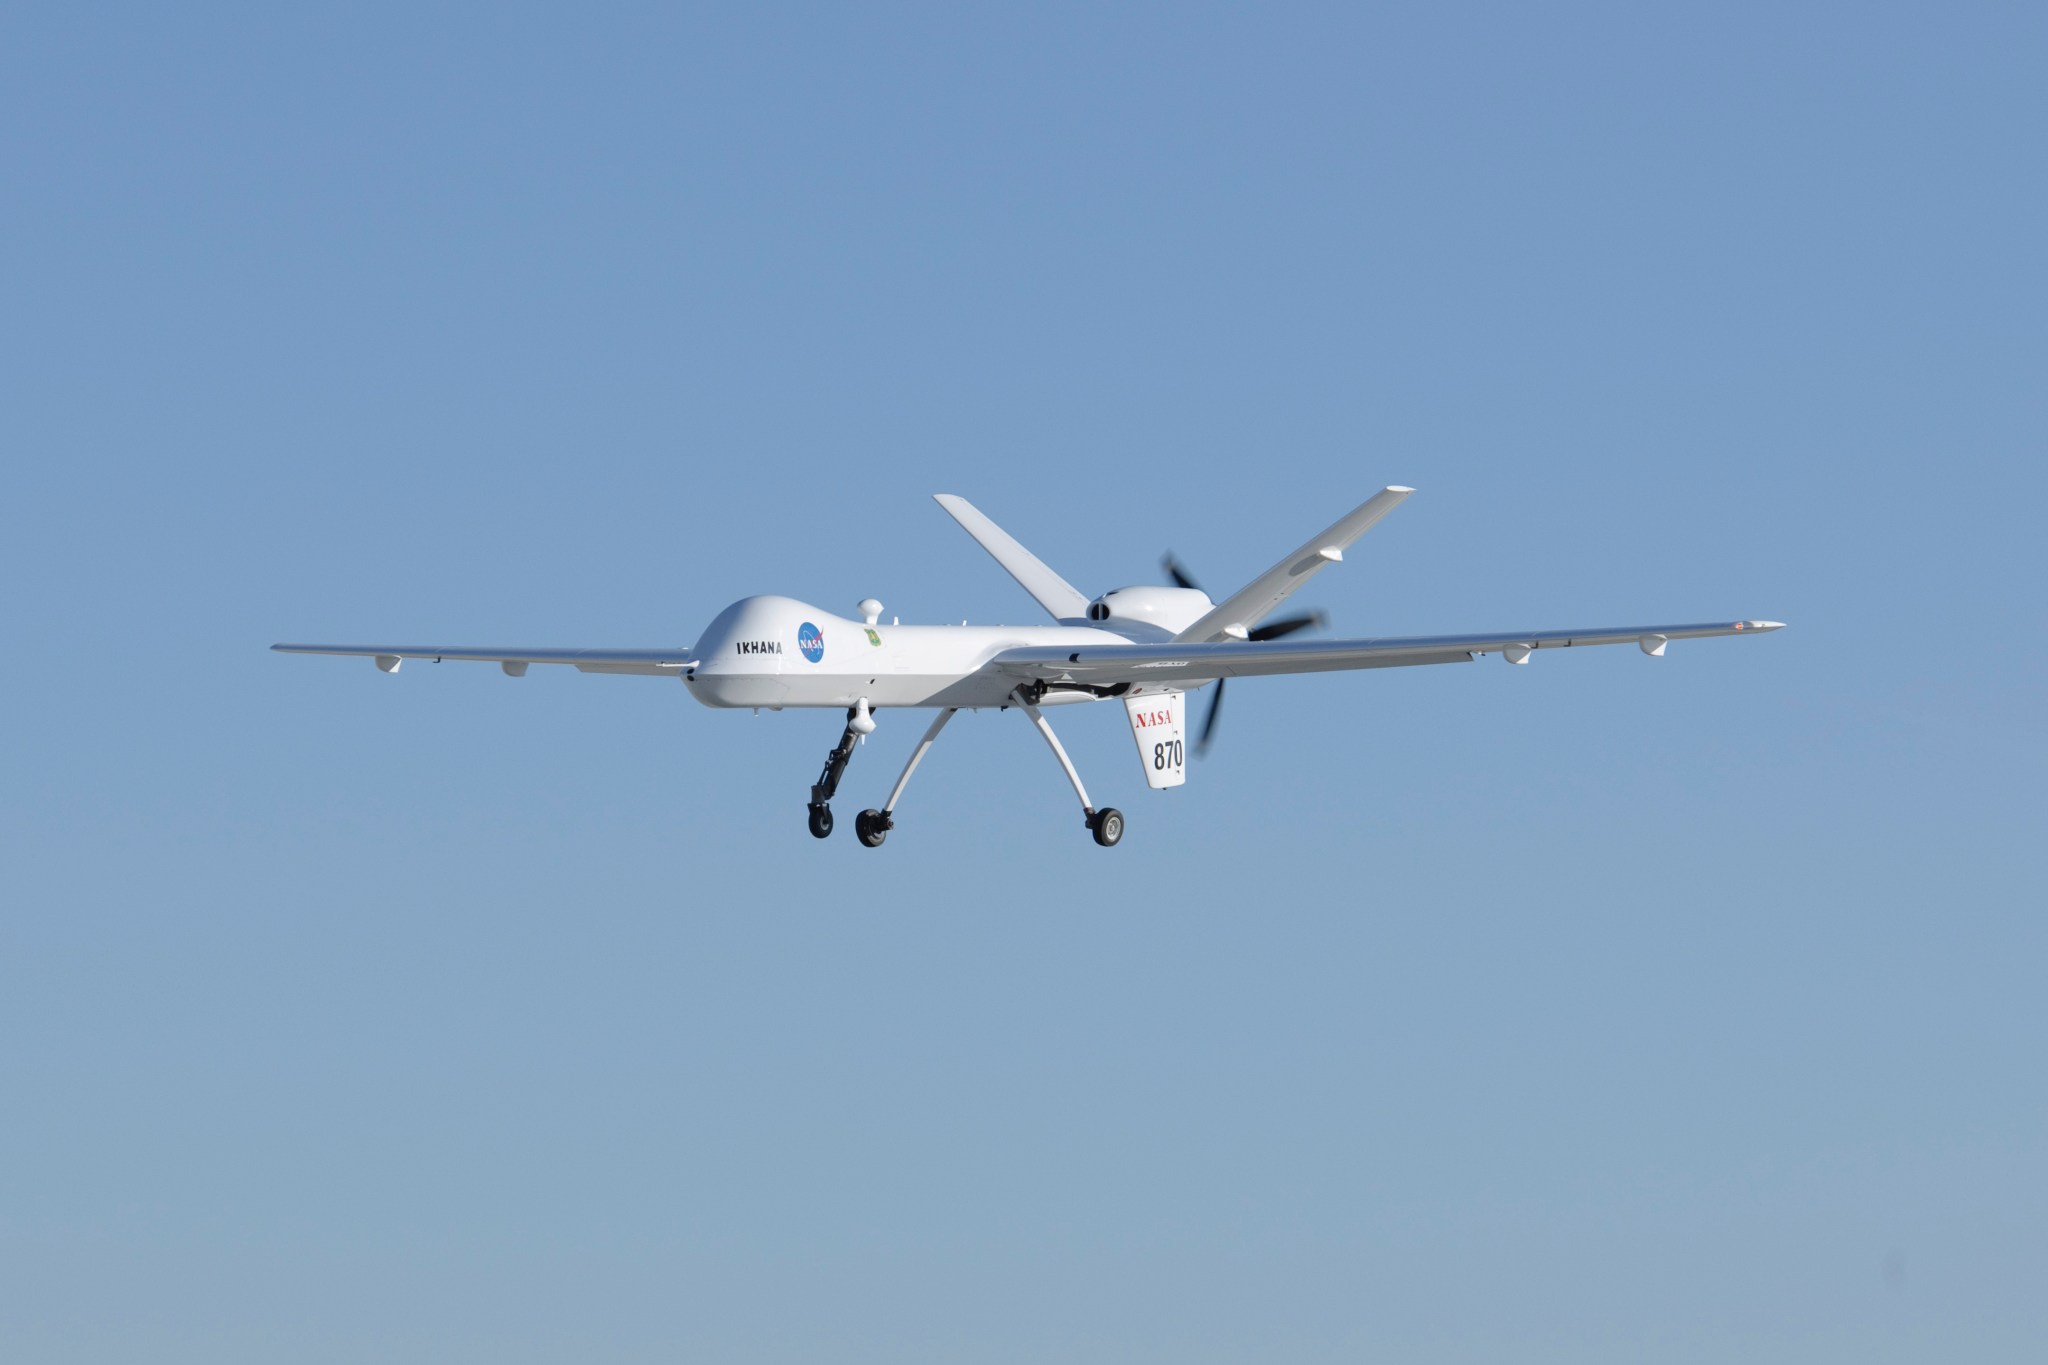 NASA unmanned aircraft in flight.